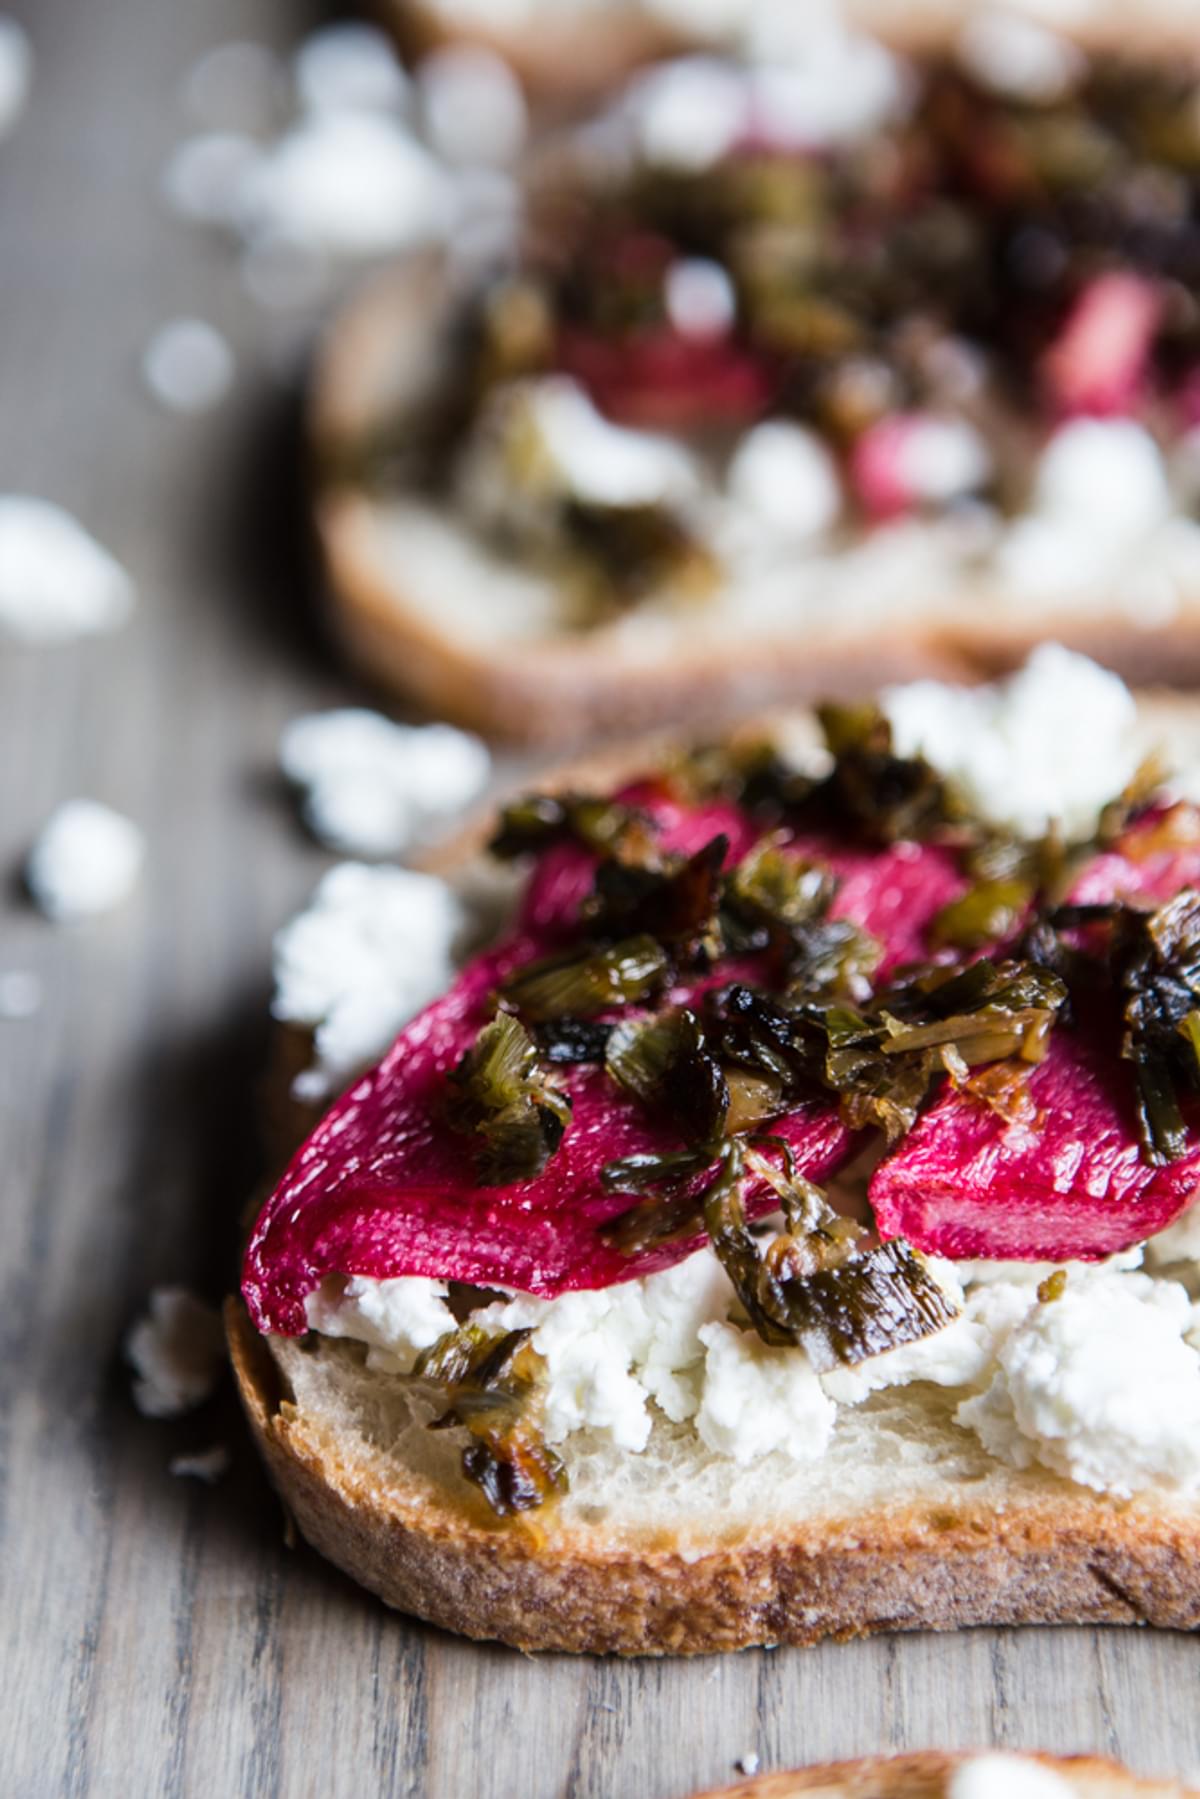 Roasted Rhubarb and Chevre Grilled Cheese with caramelized onions